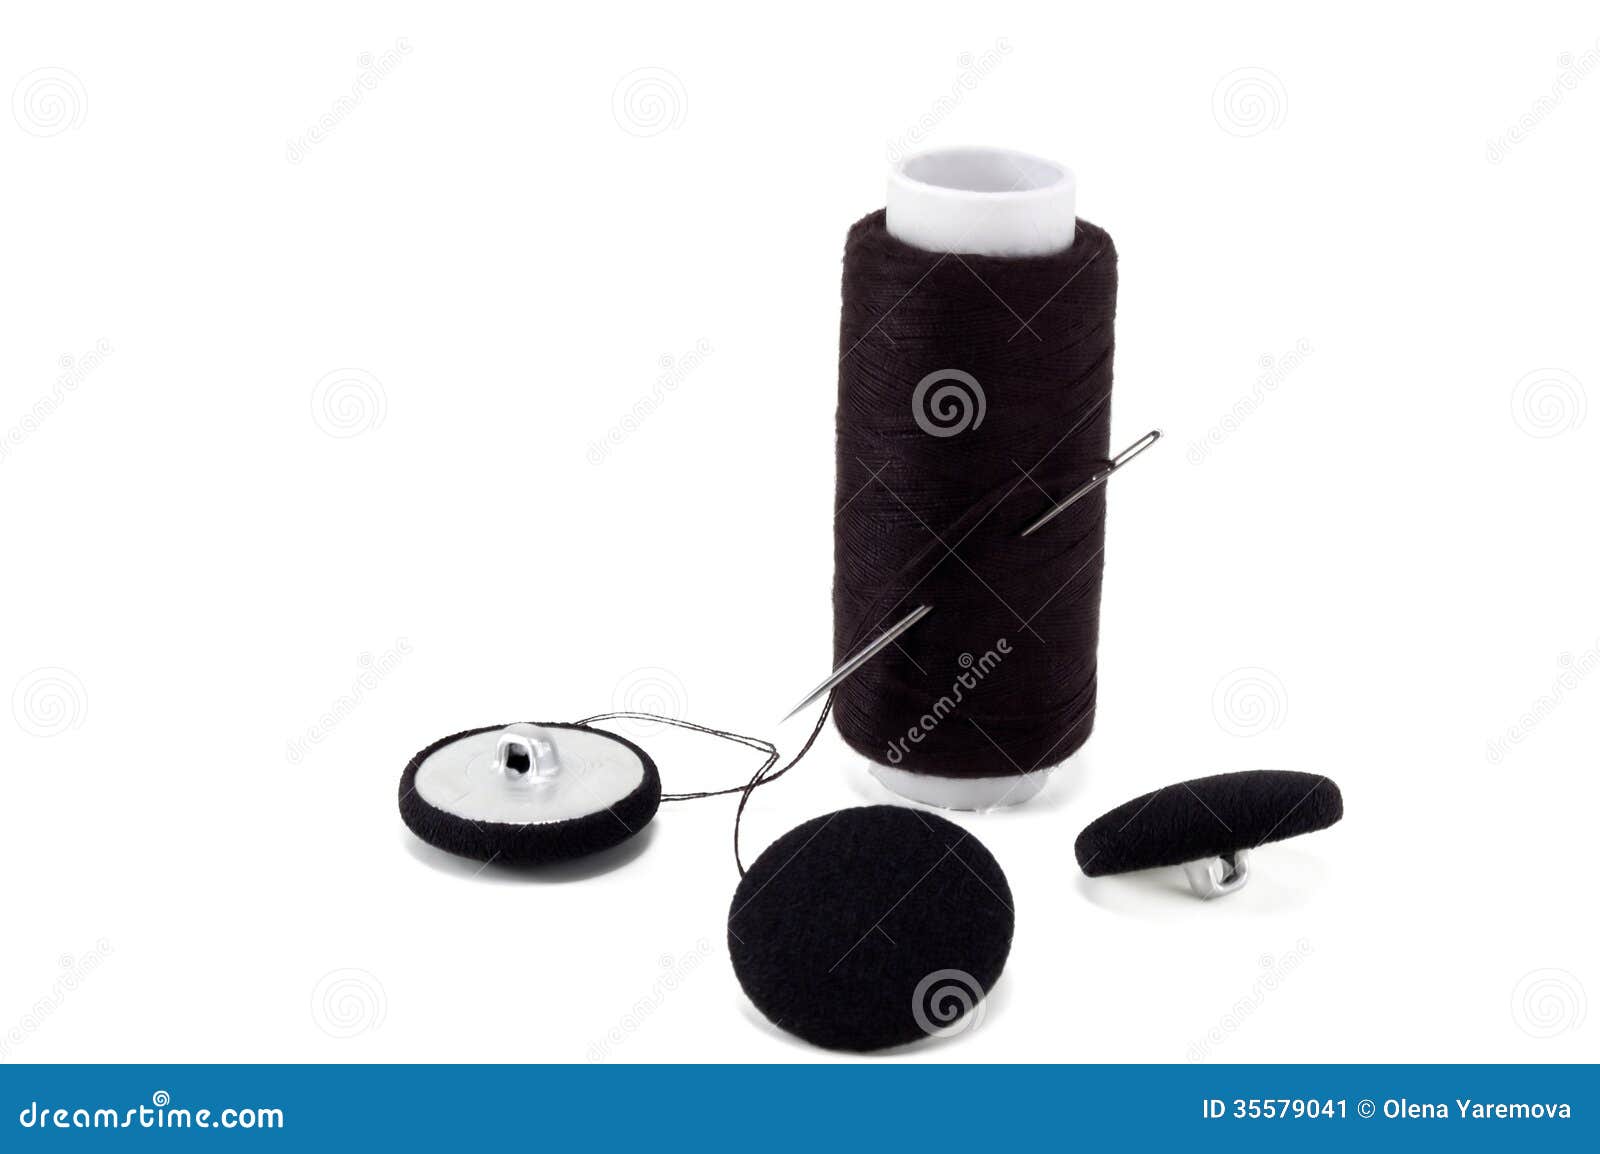 Black Thread with Needle and Buttons Stock Image - Image of sports